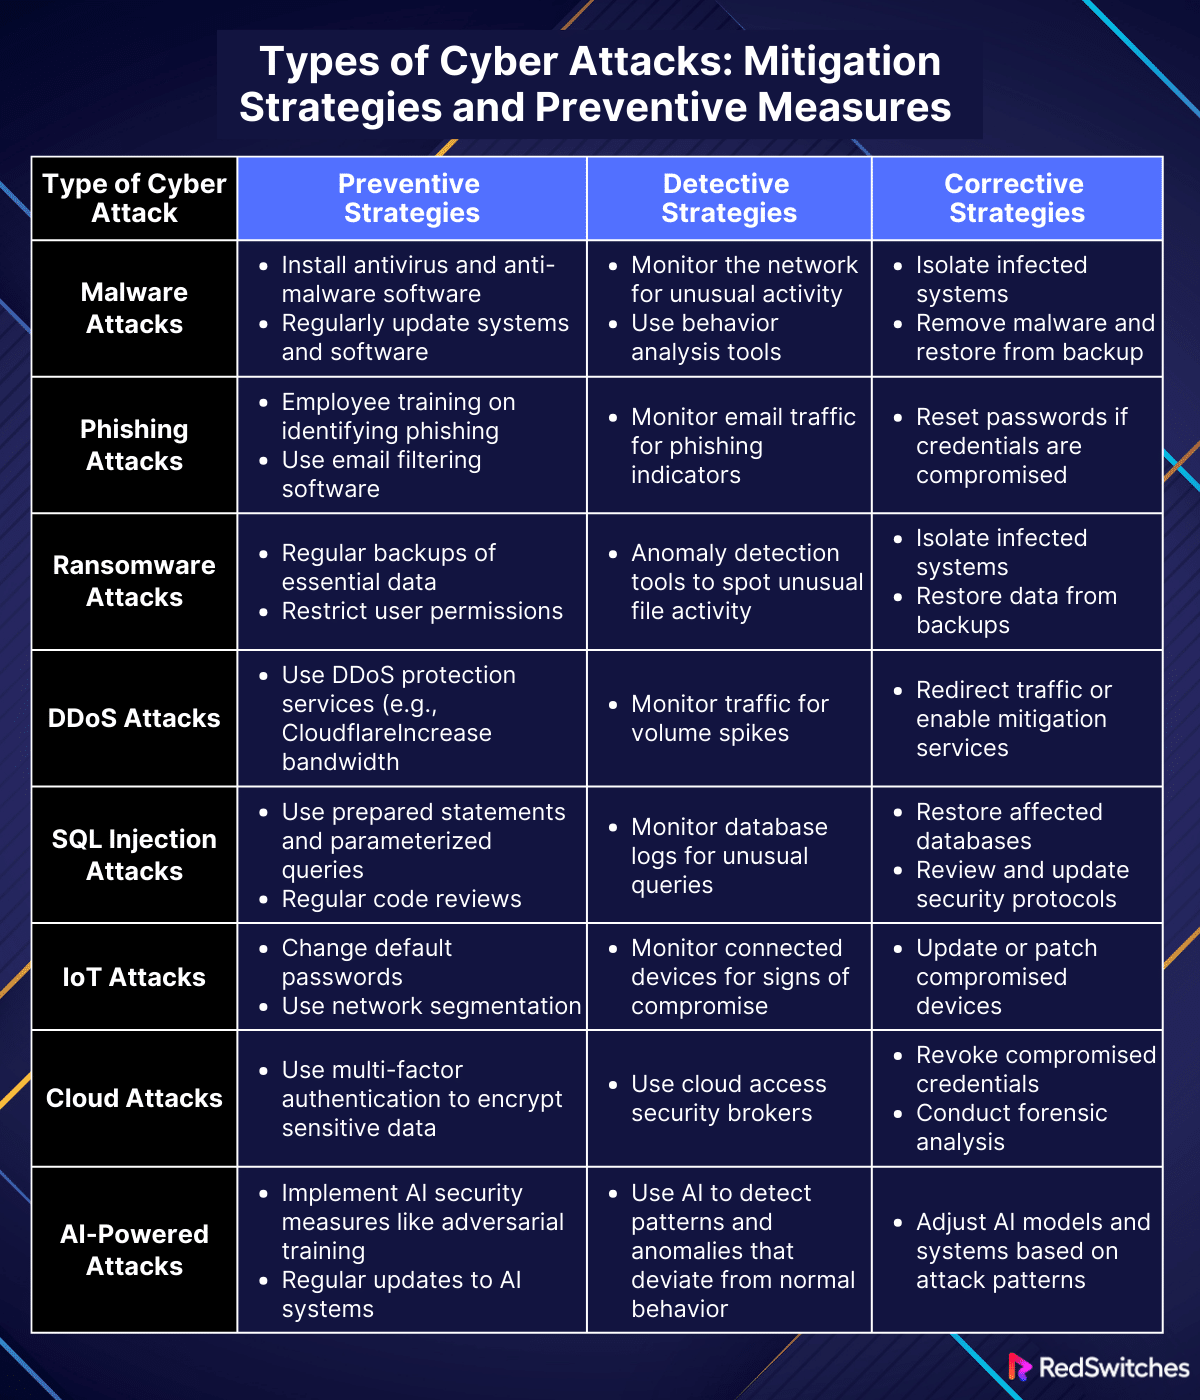 Types of Cyber Attacks: Mitigation Strategies and Preventive Measures